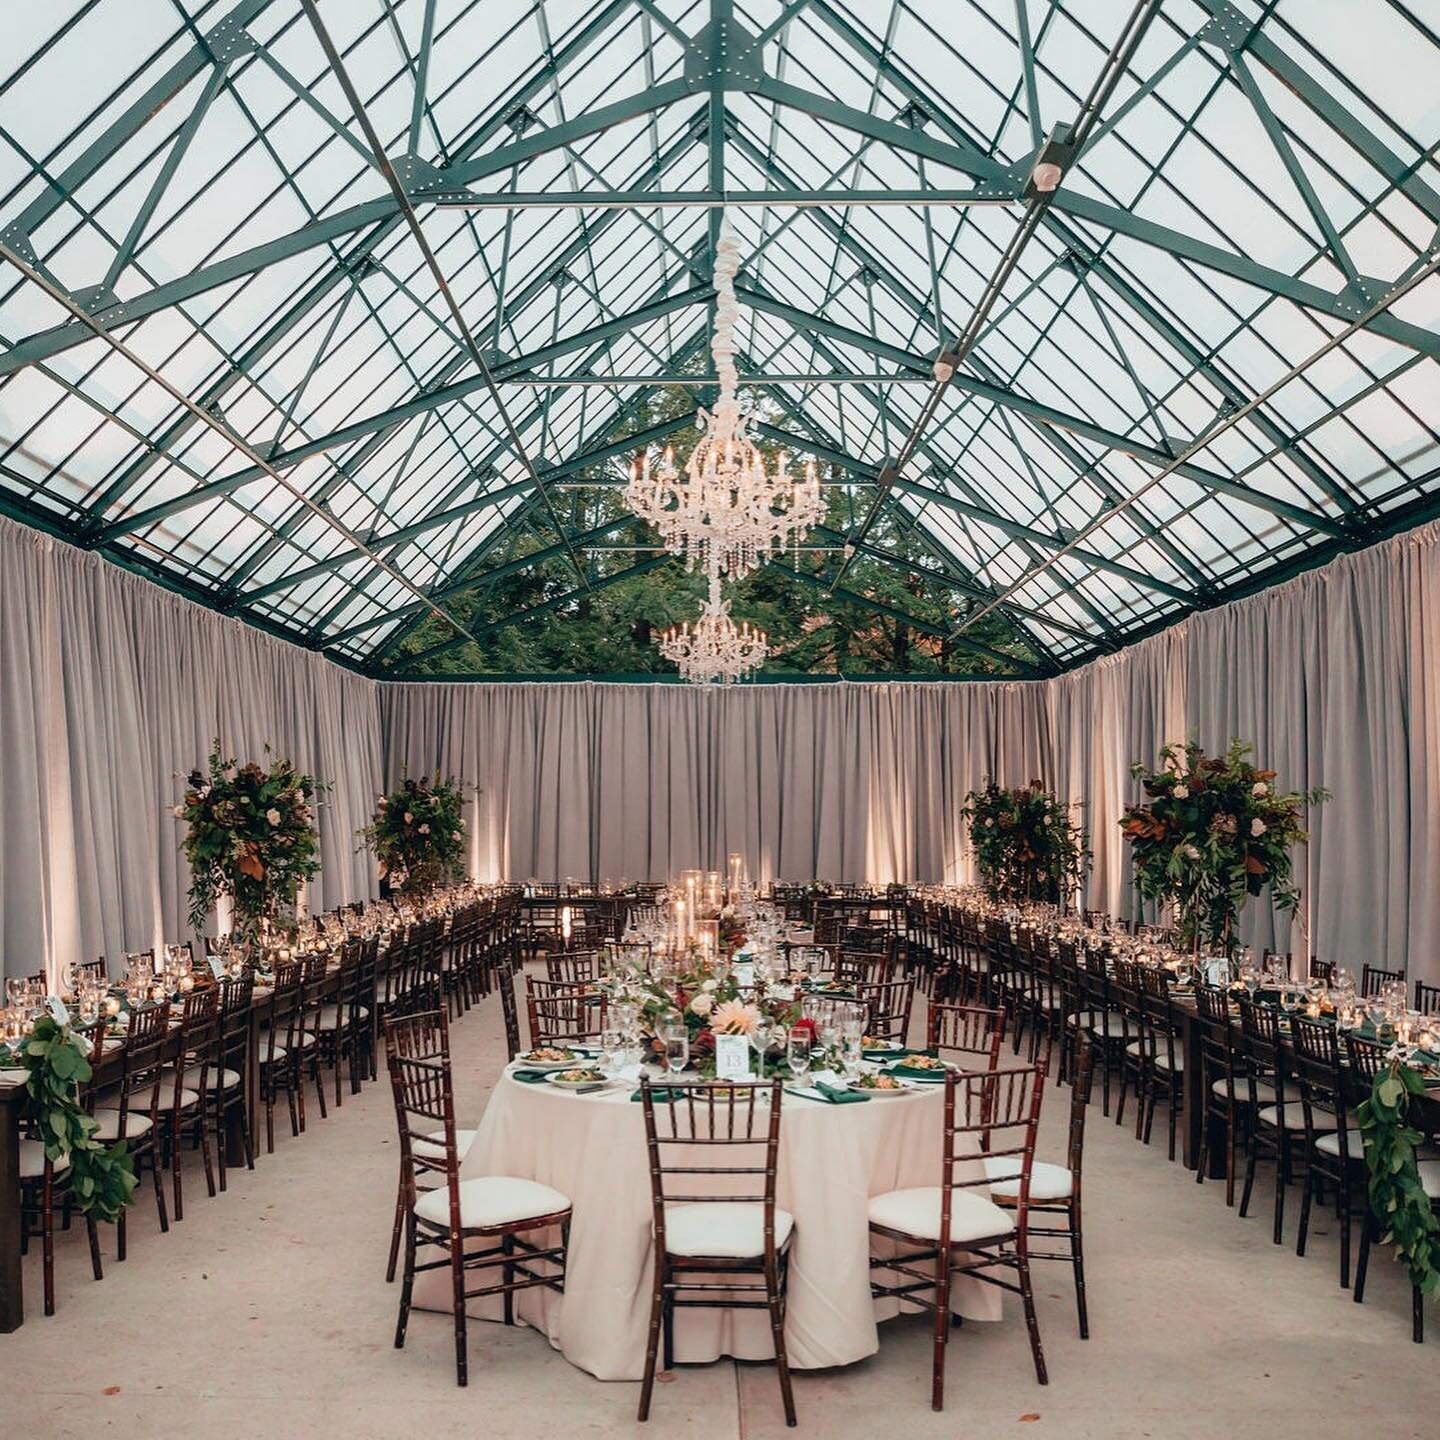 That mix of farm tables and rounds + the classic chiavari chair gets us every time 💕✨. The warm wood, gorgeous florals, and expansive ceiling heights of the Hartwood Acres Grand Pavilion puts this beautiful wedding over the WOW ⚖️ big time 😍
.
- - 